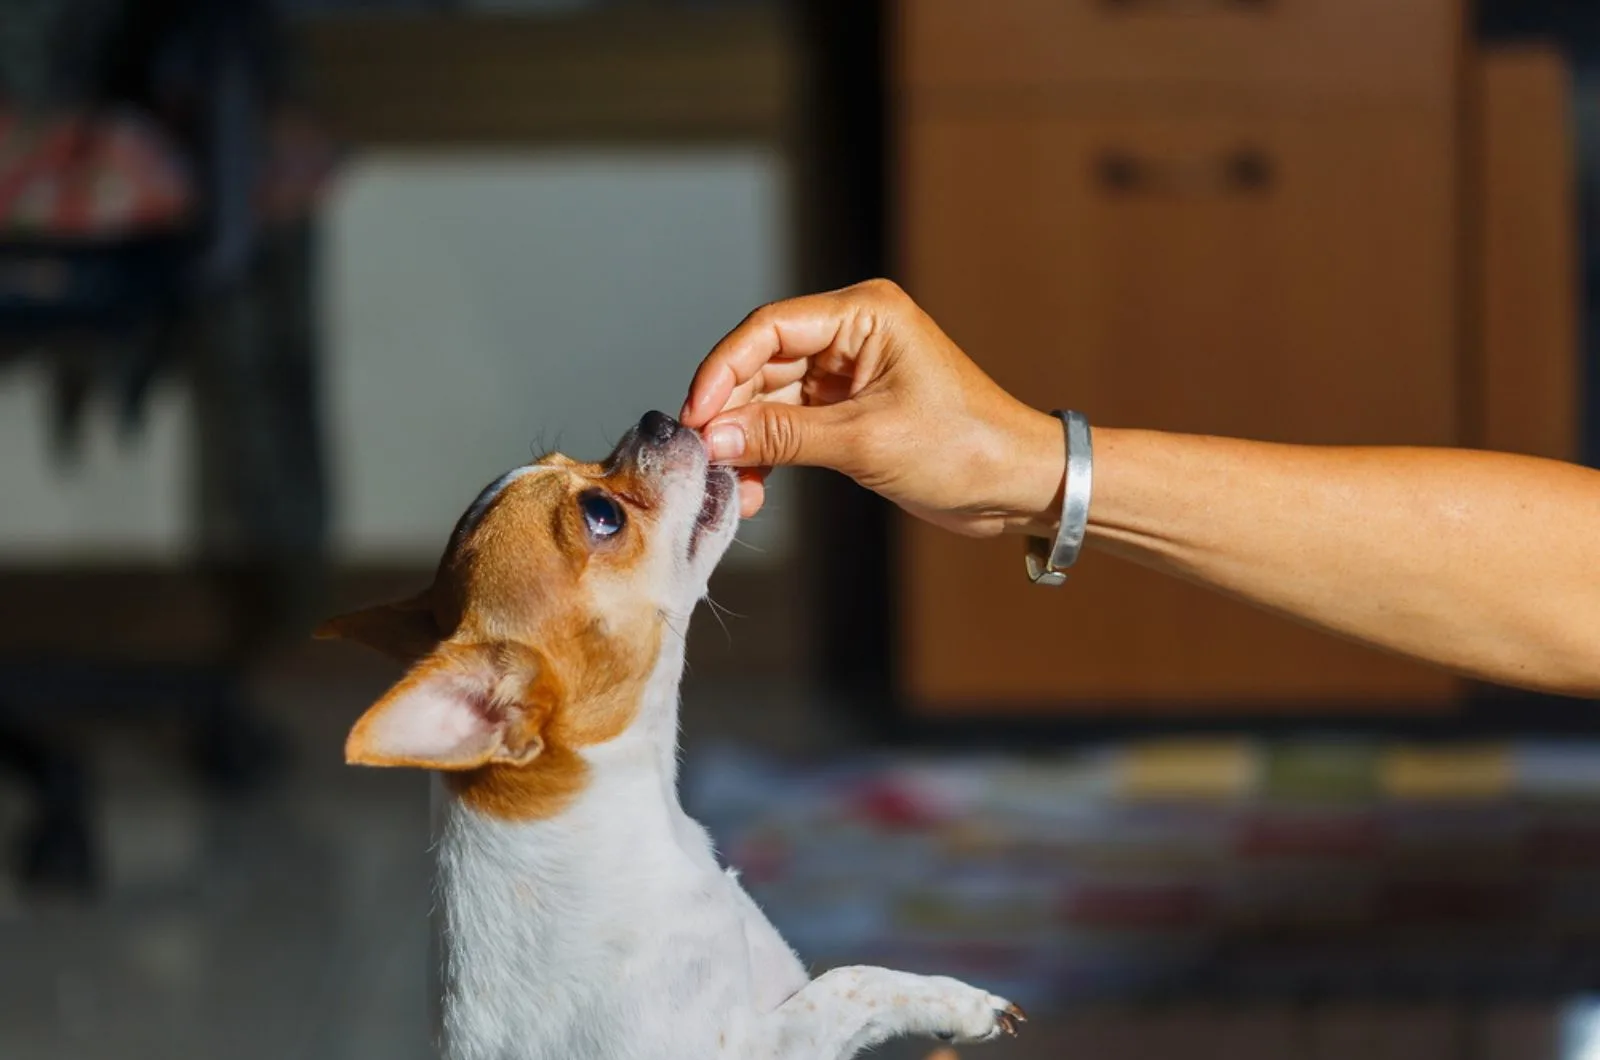 dog taking a treat from owner's hand